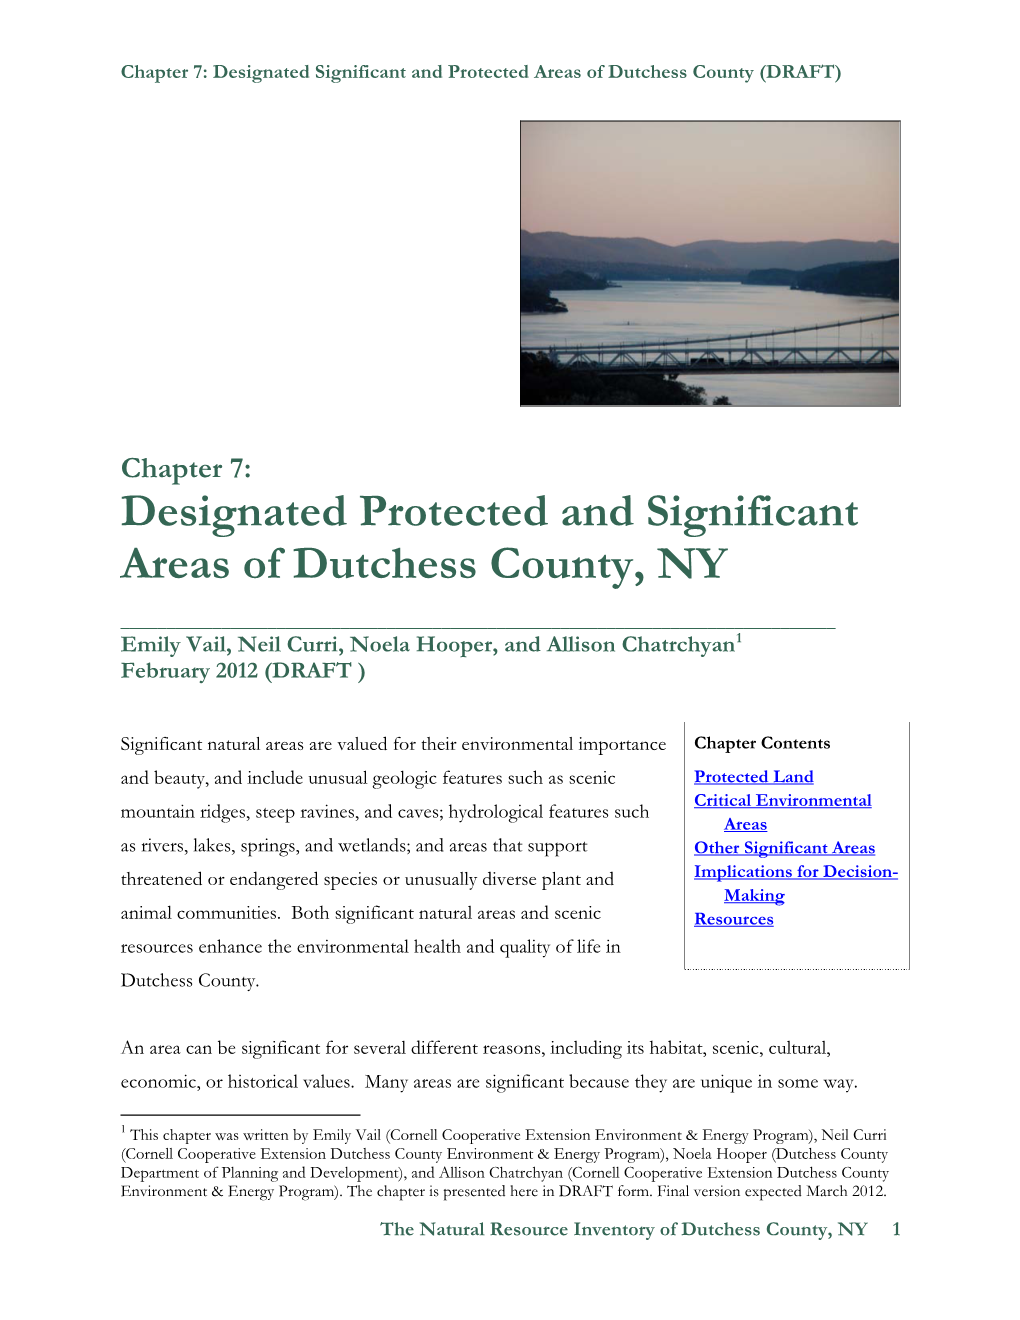 Designated Protected and Significant Areas of Dutchess County, NY